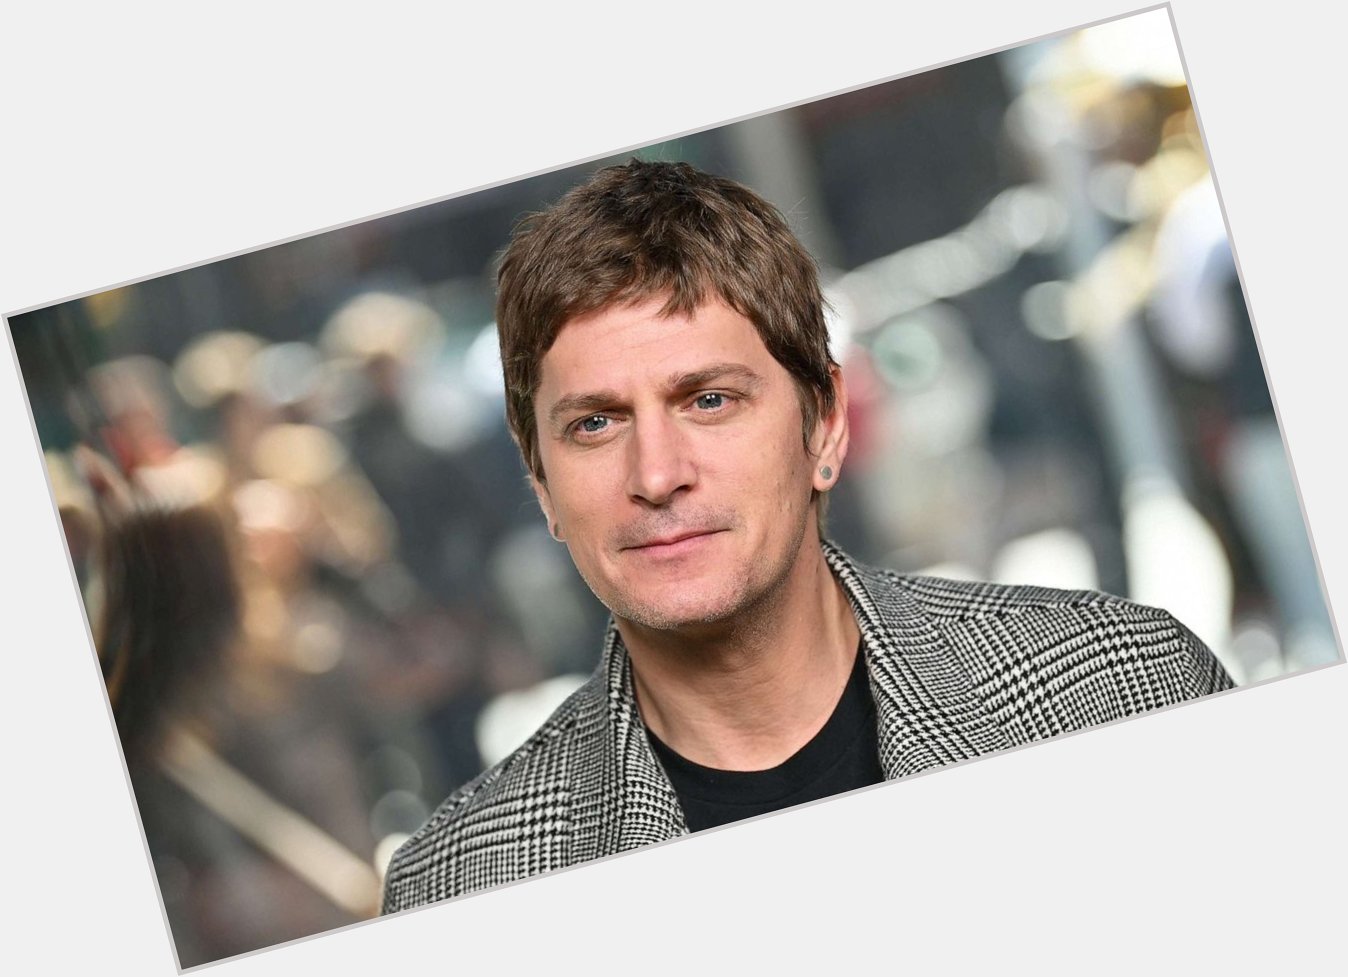 Please join me here at in wishing the one and only Rob Thomas a very Happy 49th Birthday today  